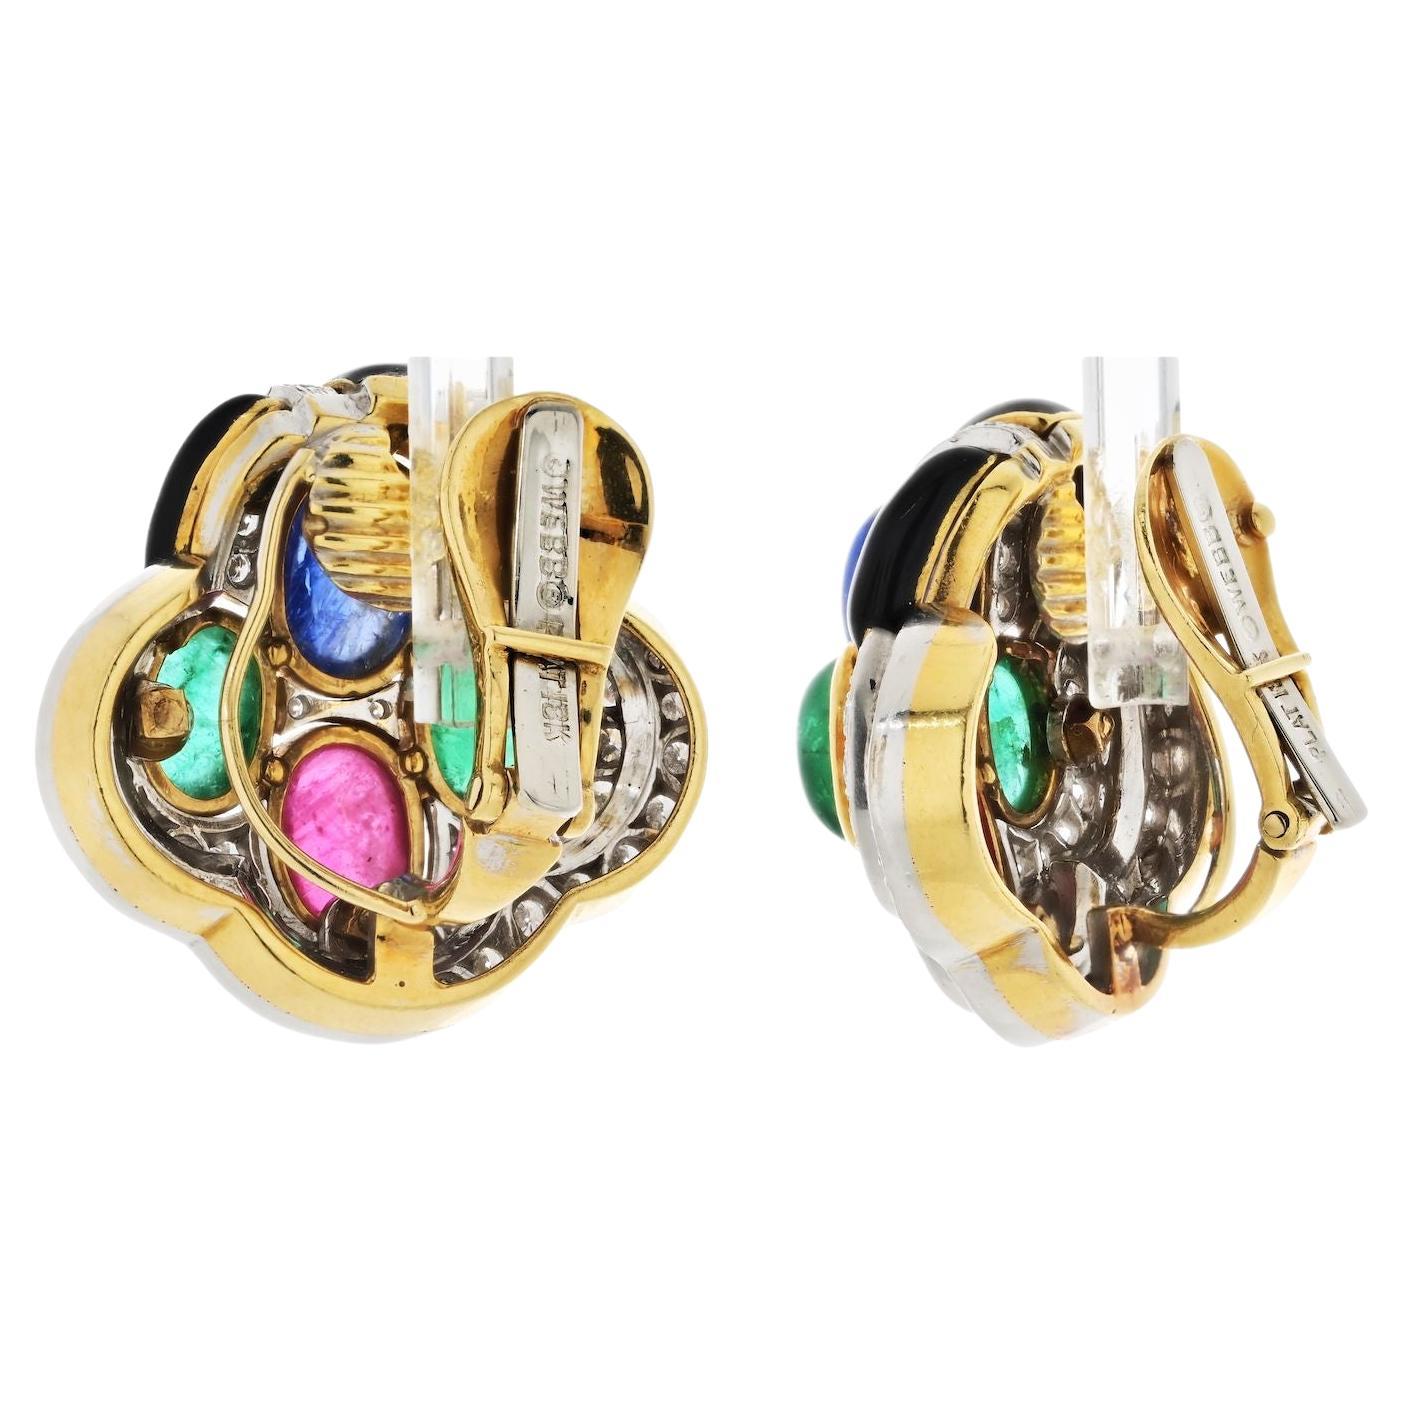 These David Webb earrings are a stunning example of the brand's exquisite craftsmanship and attention to detail. Measuring at about 3cm in length, they are crafted in 18k yellow gold, giving them a luxurious and timeless appeal. The earrings are